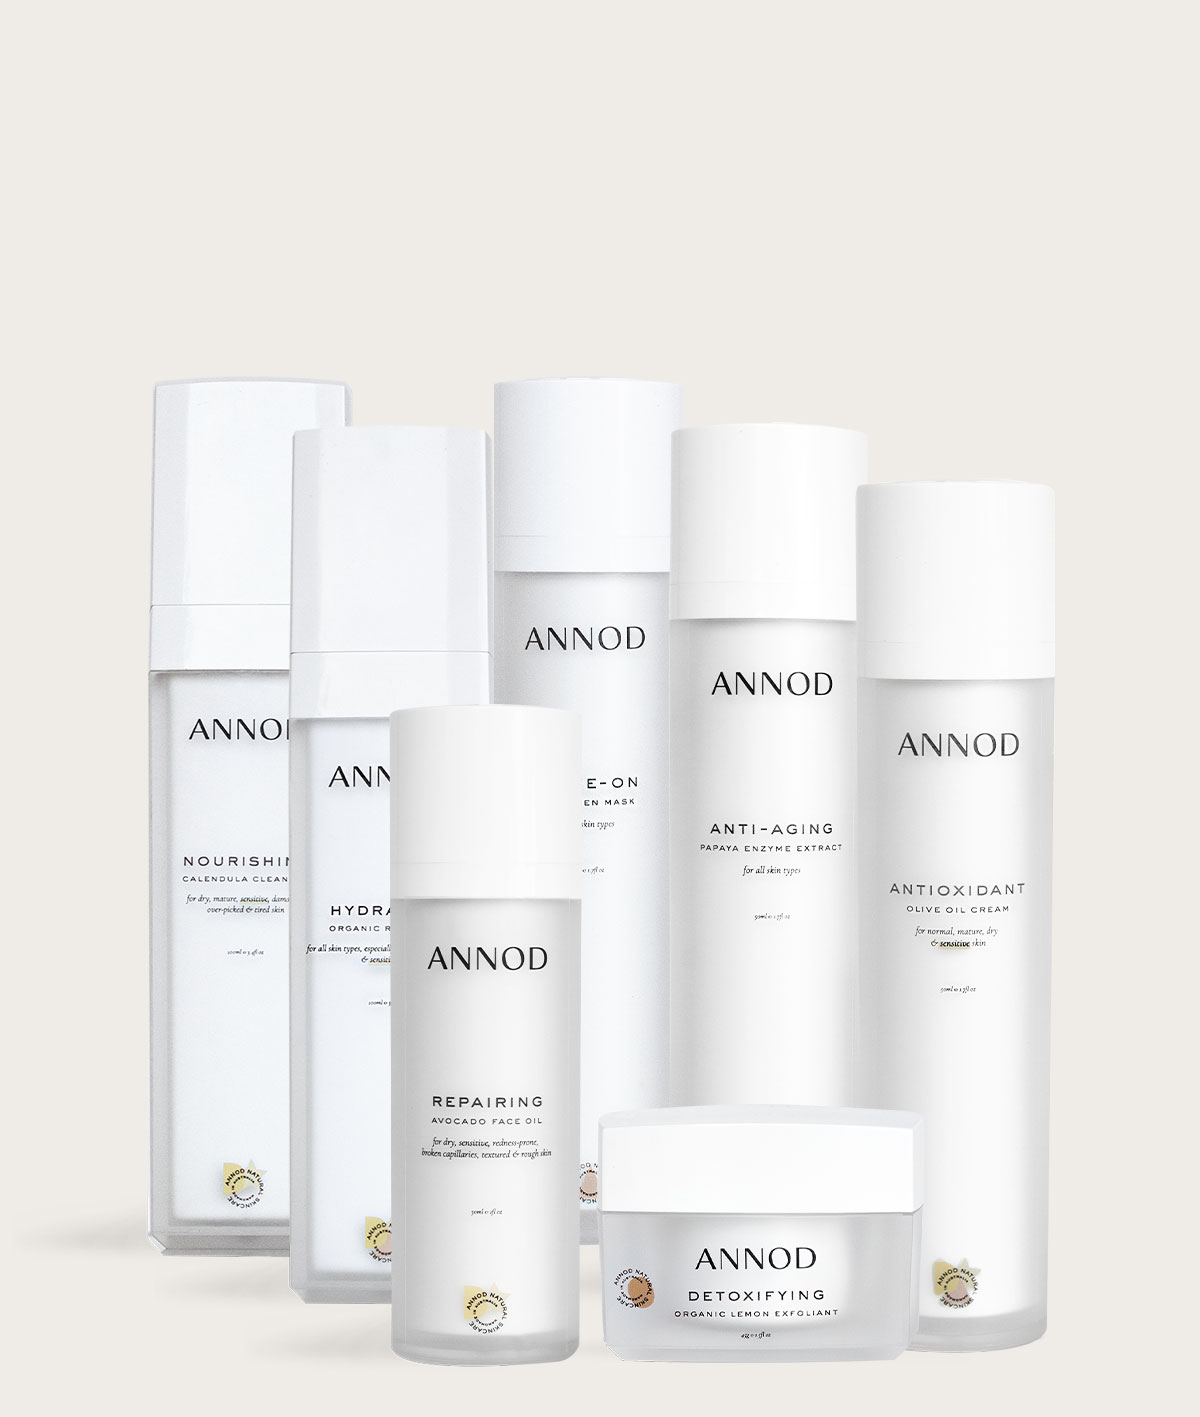 Ageless Club Start up Pack consisting of Annod's Anti Aging Product Range